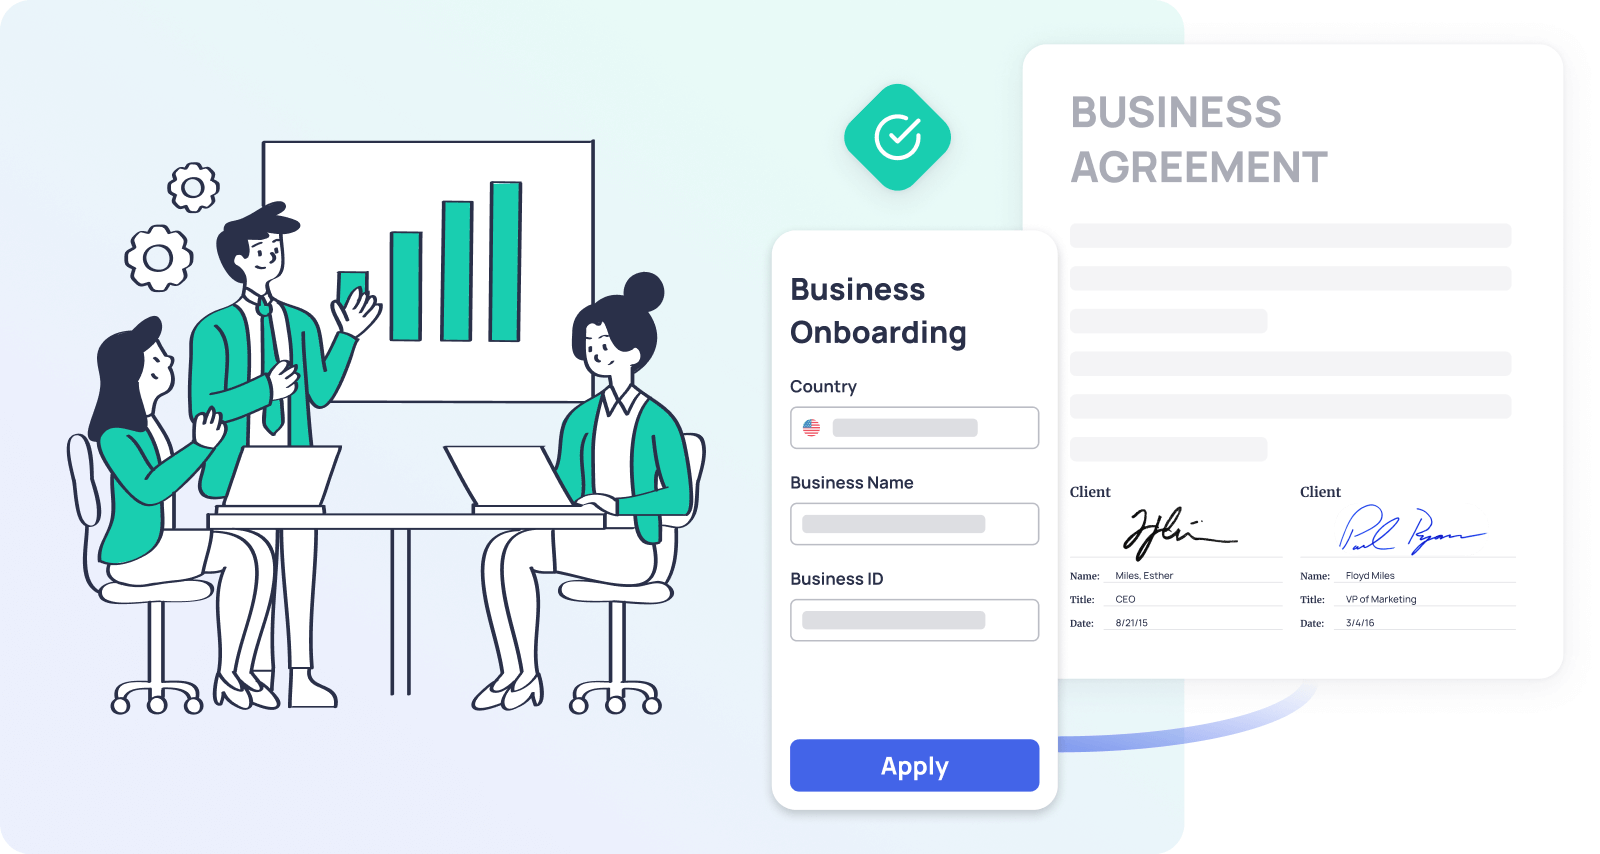 Hassle Free business onboarding with a single link